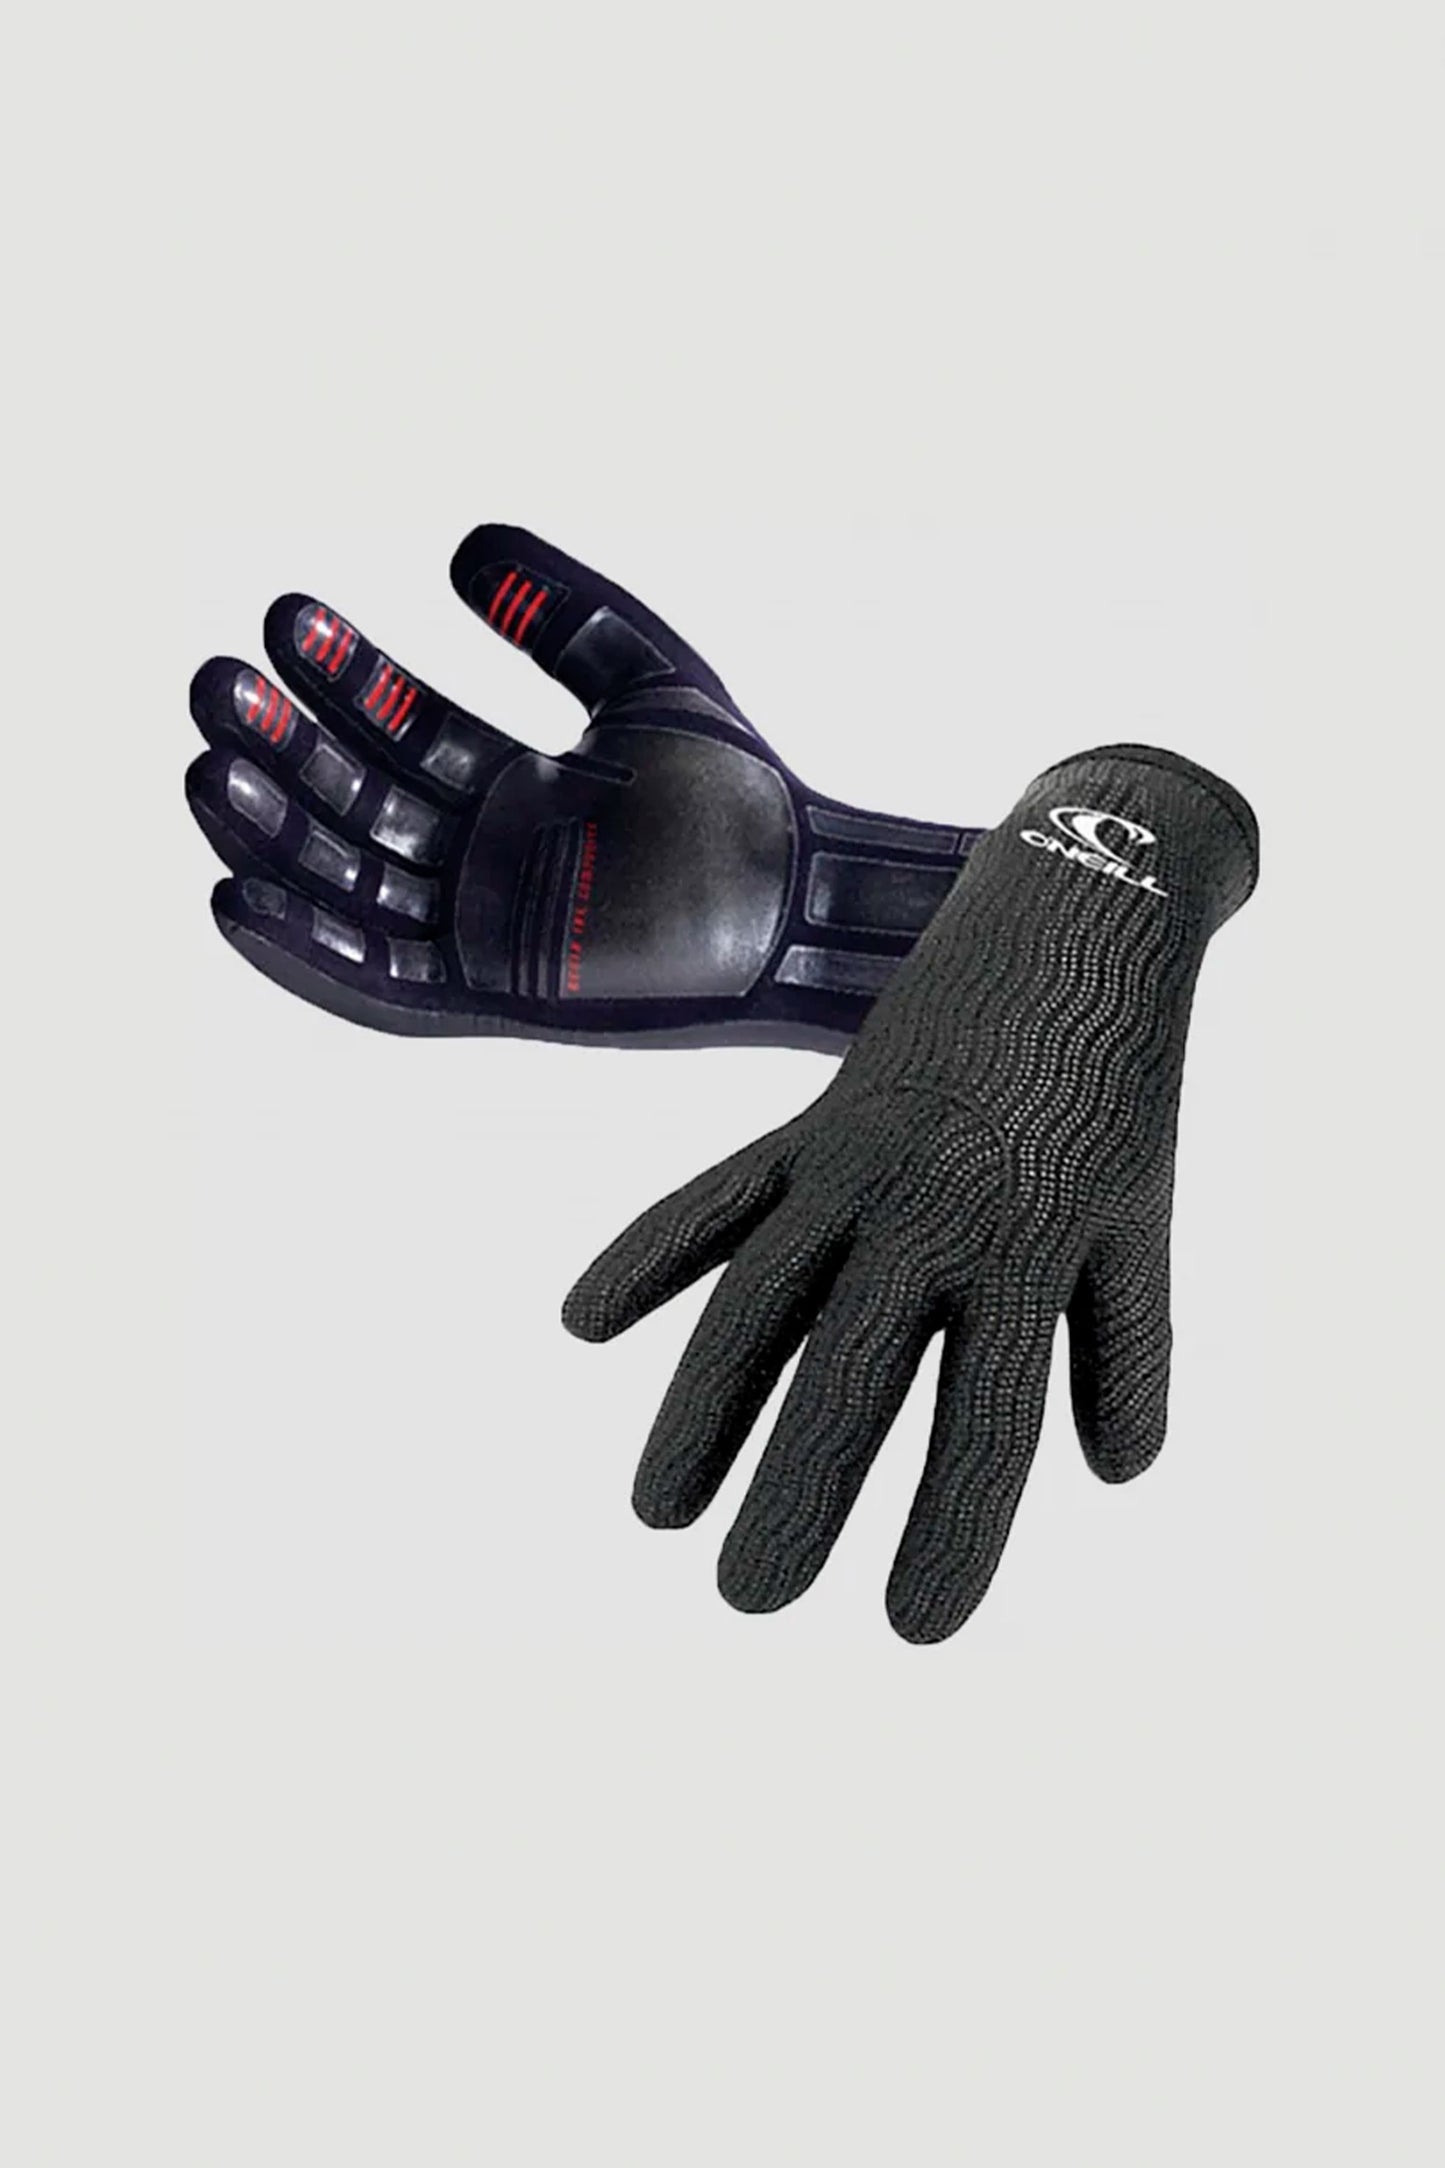    Pukas-Surf-Shop-oneill-wetsuit-gloves-Youth-Epic-2mm